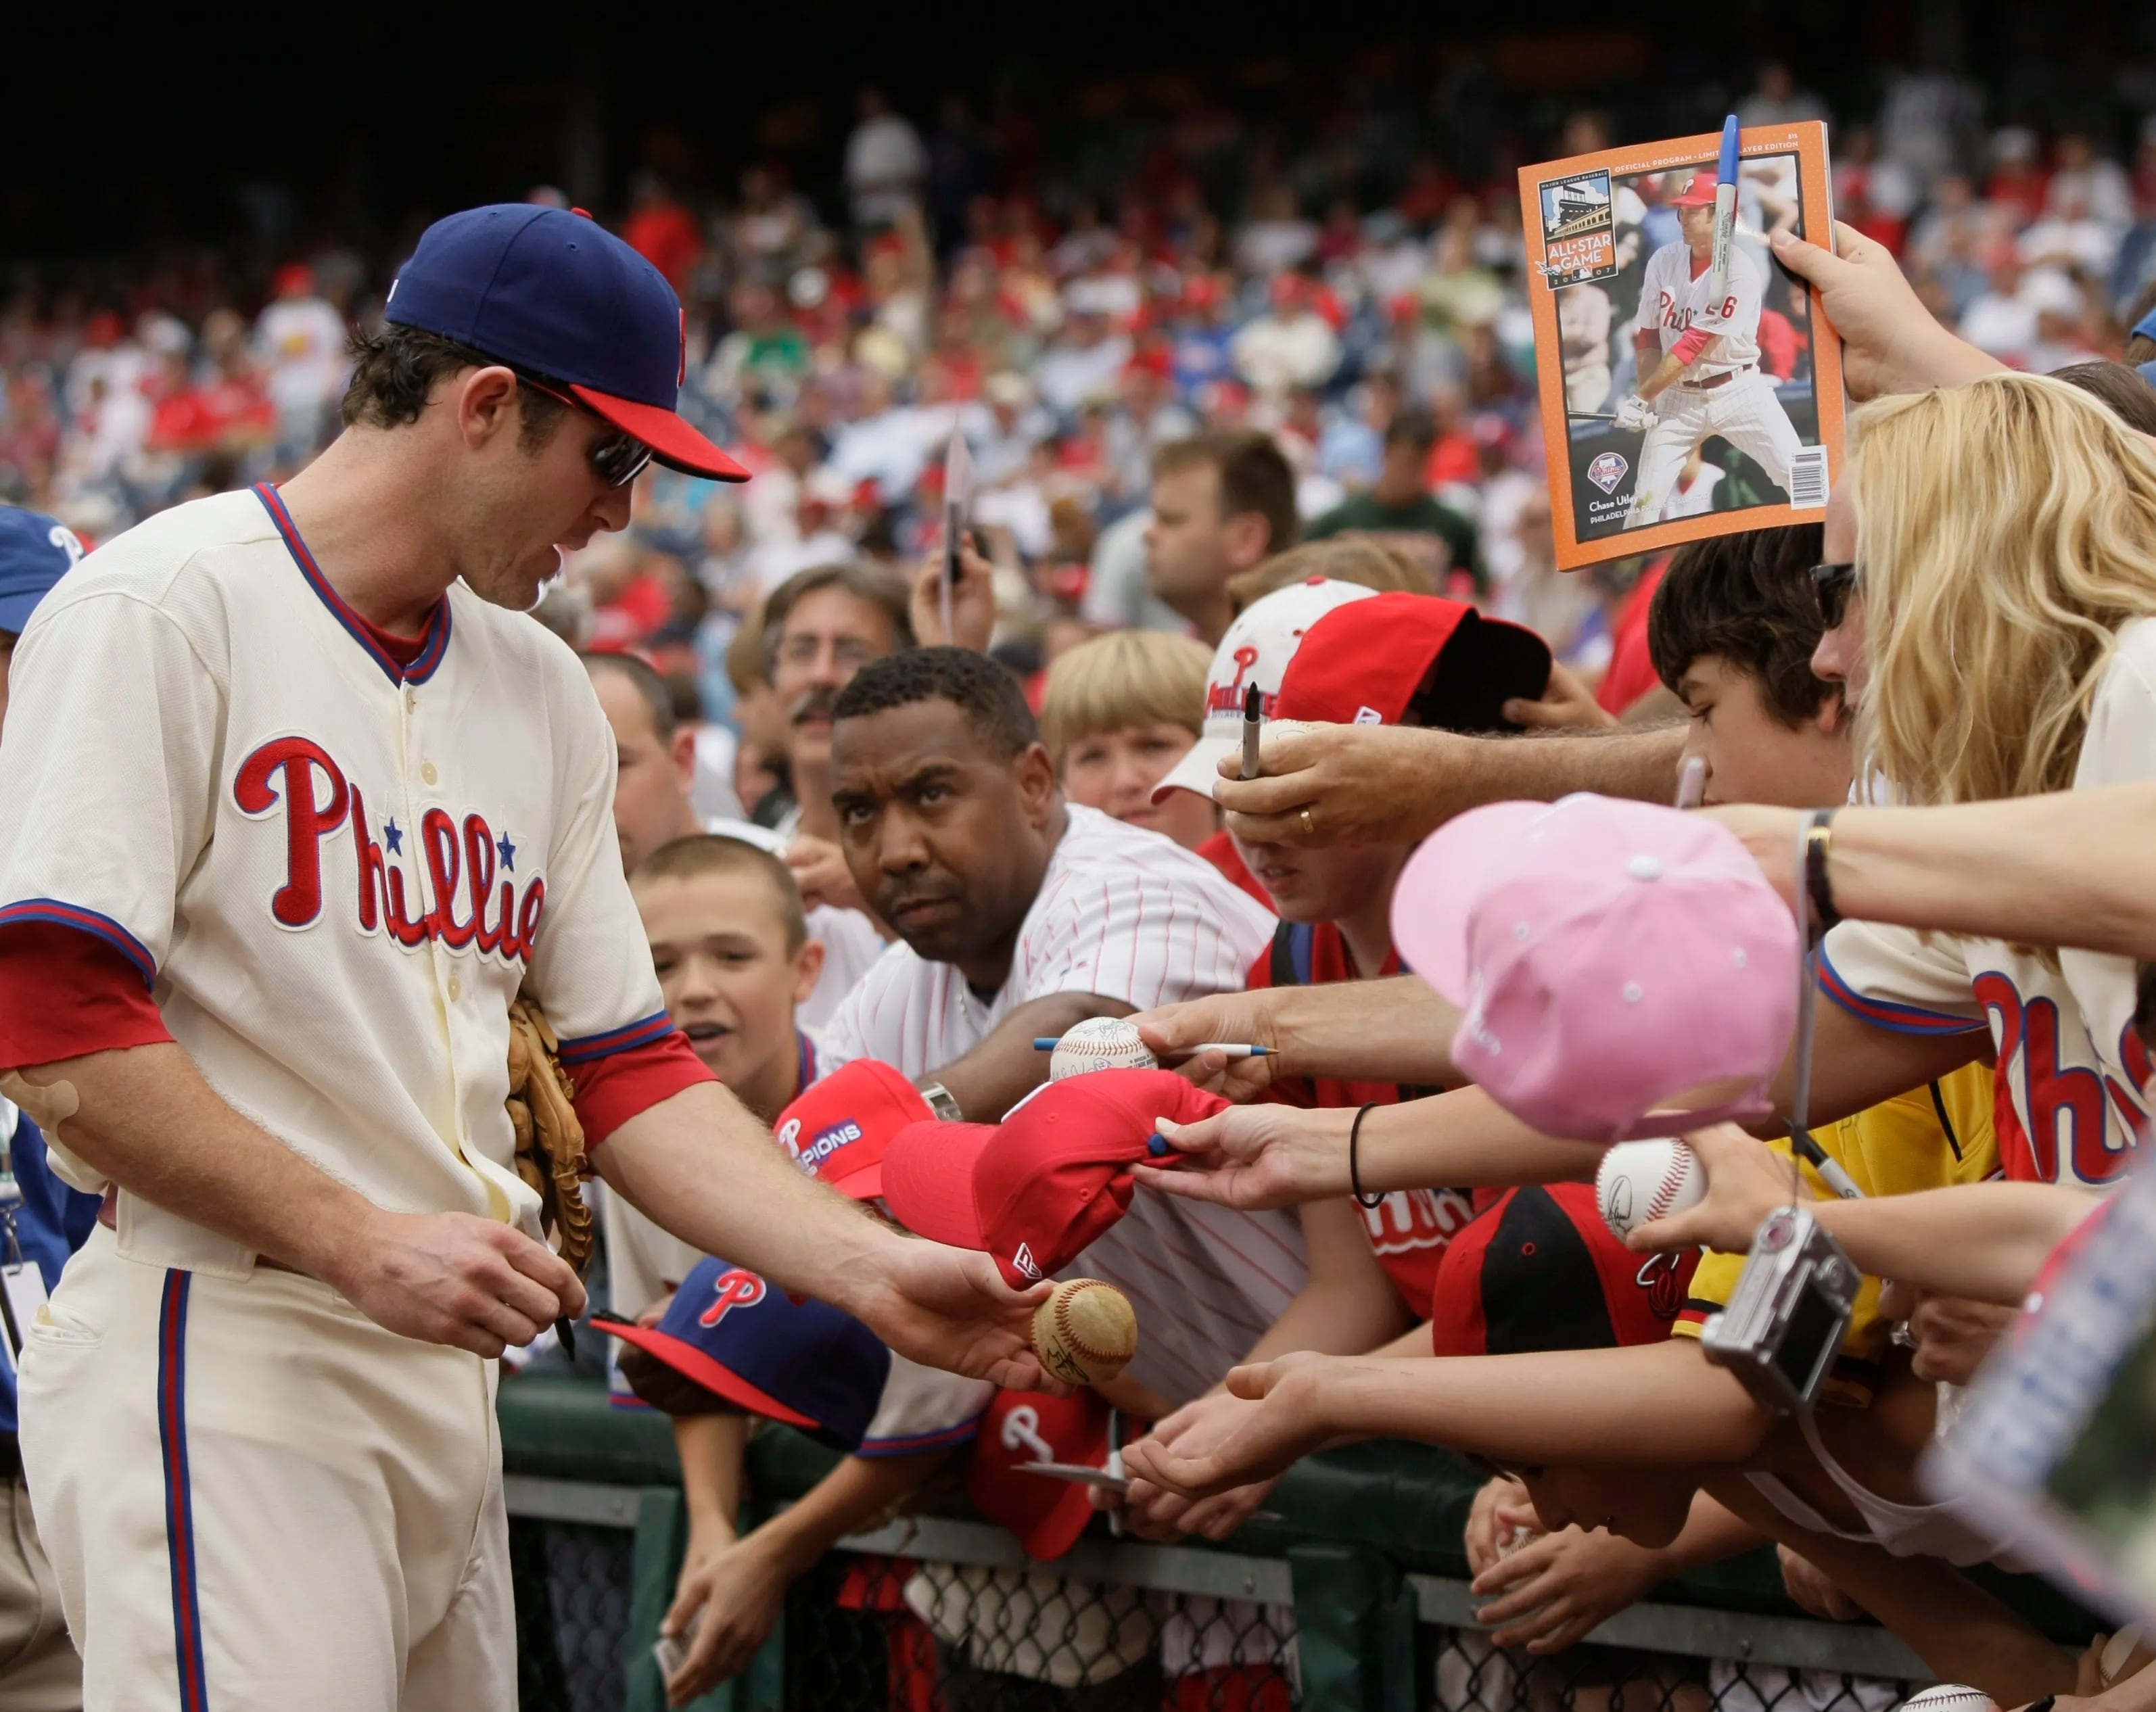 Fmr. Phillies star Chase Utley to retire at the end of 2018 - 6abc